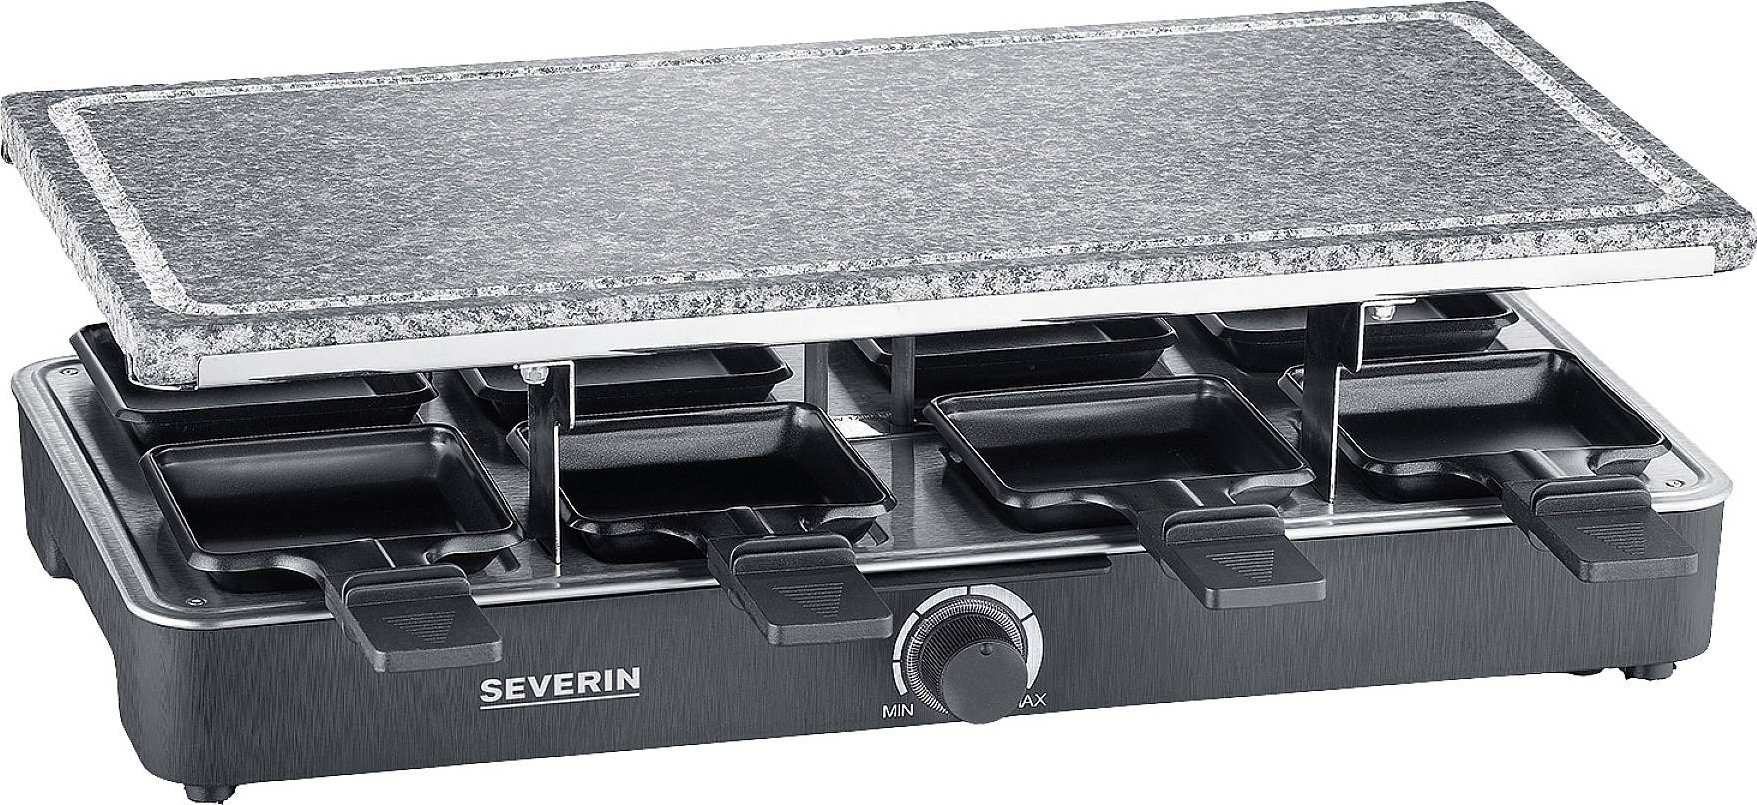 Severin RG 2378 Raclette-Partygrill Tosteris